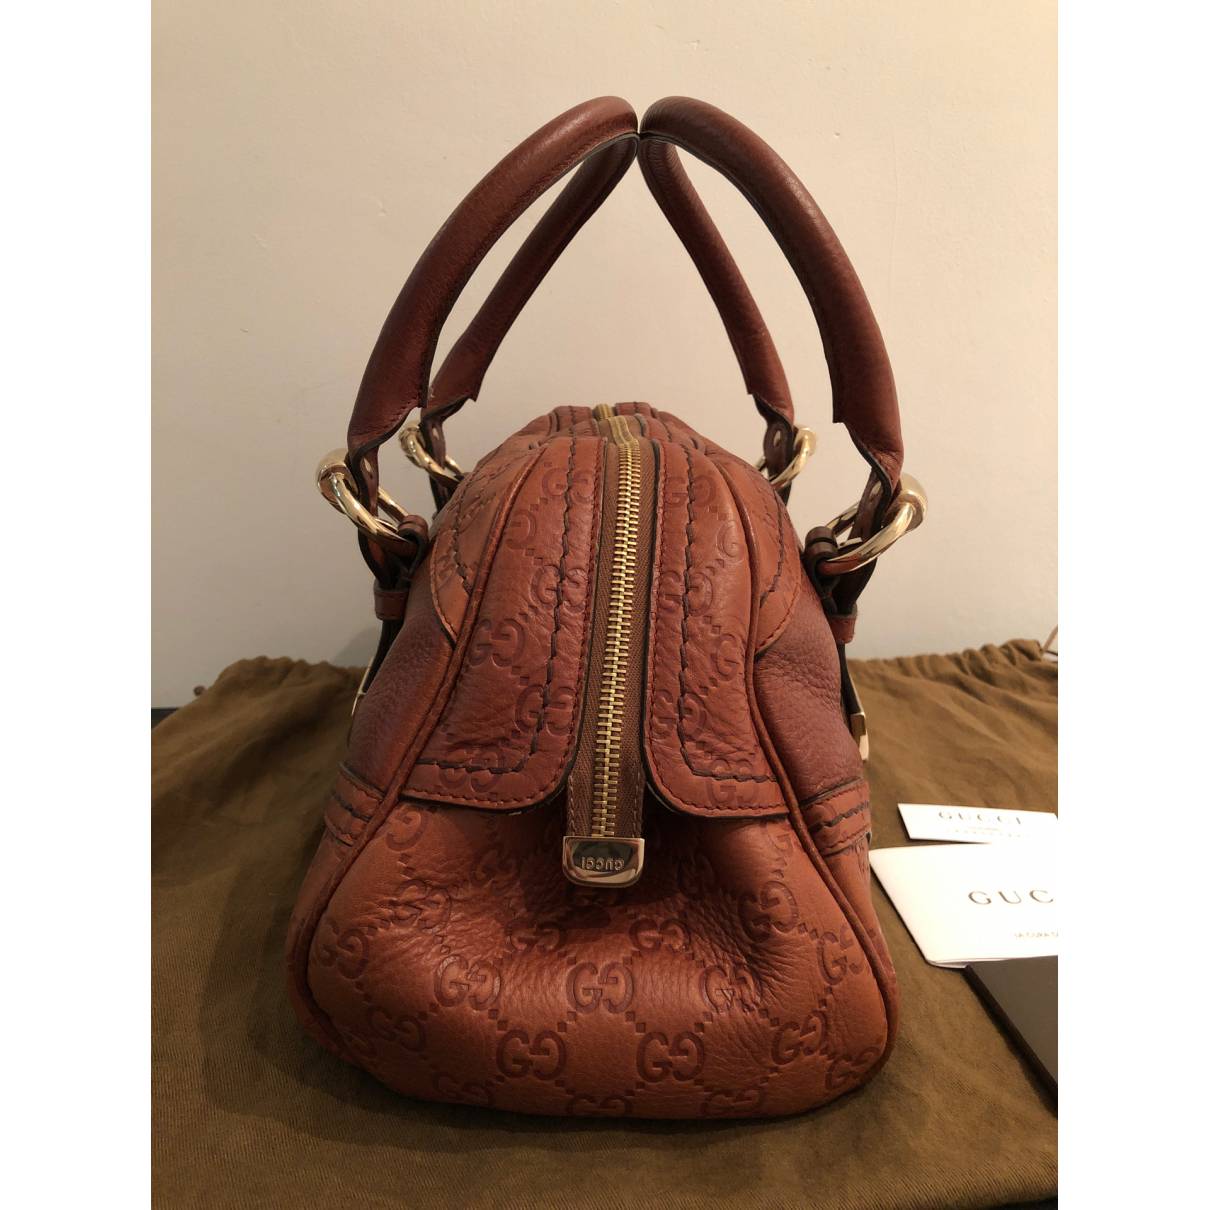 Gucci - Authenticated Bamboo Daily Top Handle Handbag - Leather Brown Plain for Women, Never Worn